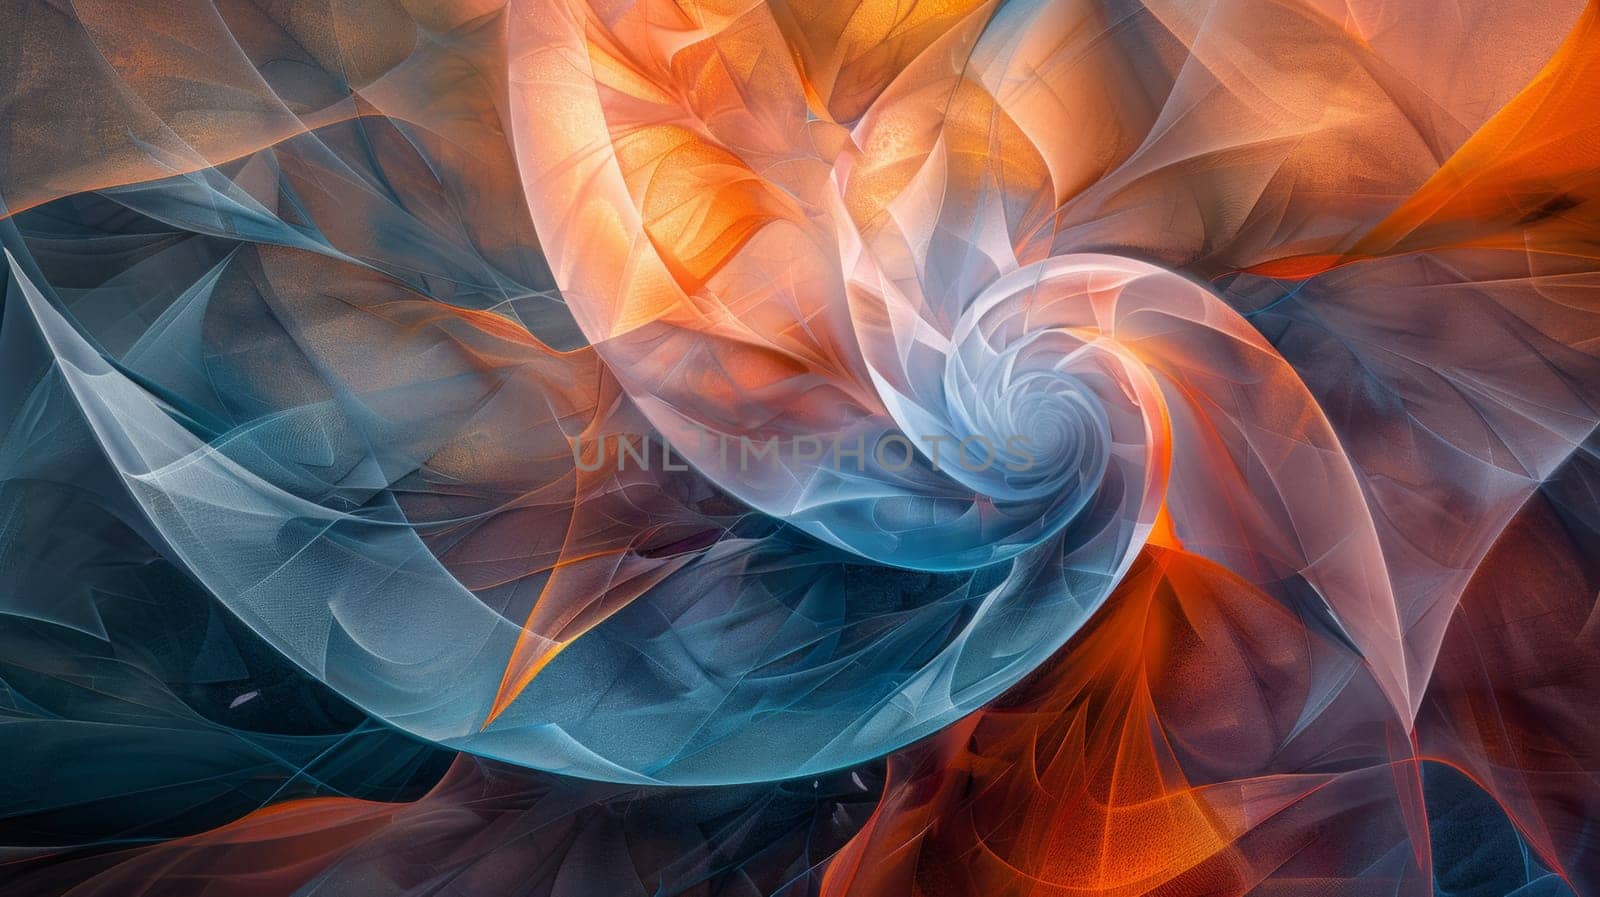 A digital art of a swirl design with orange, blue and white